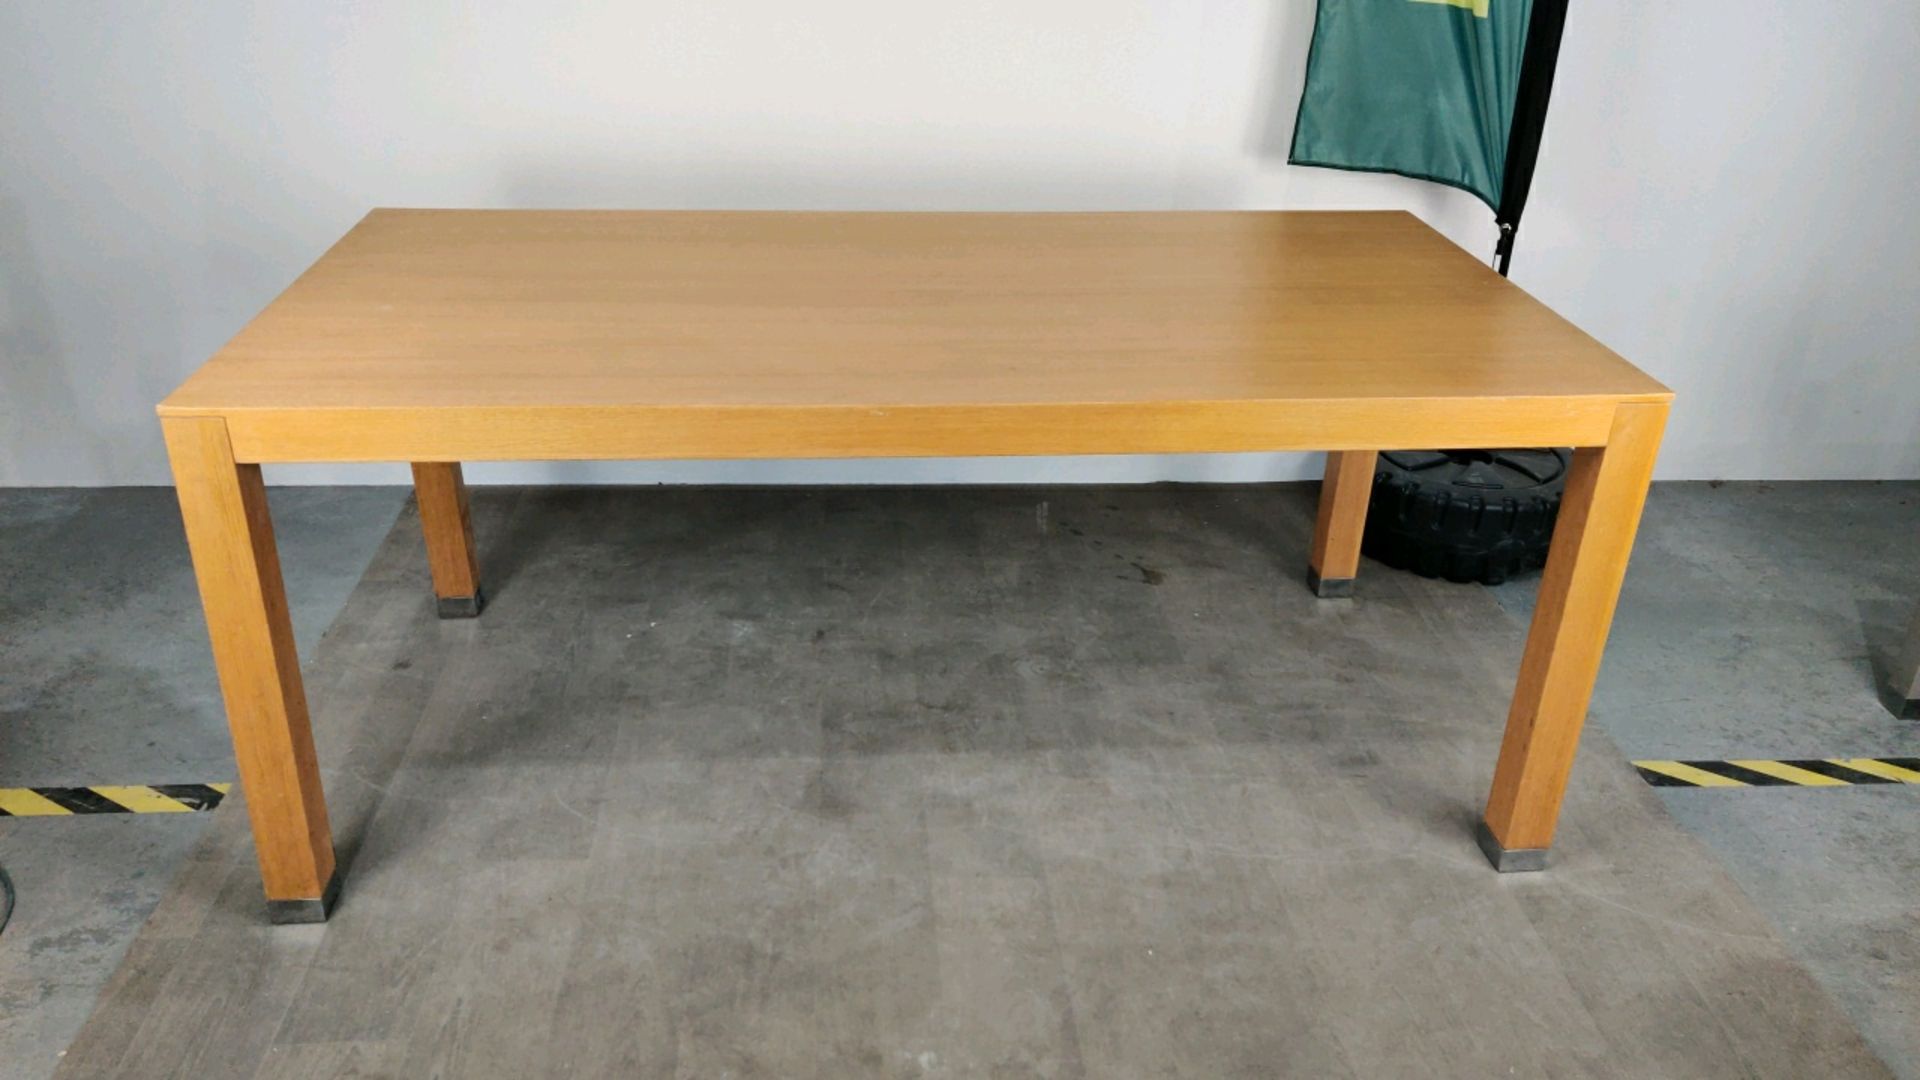 Large Wooden Table With Chromed Feet - Image 7 of 8